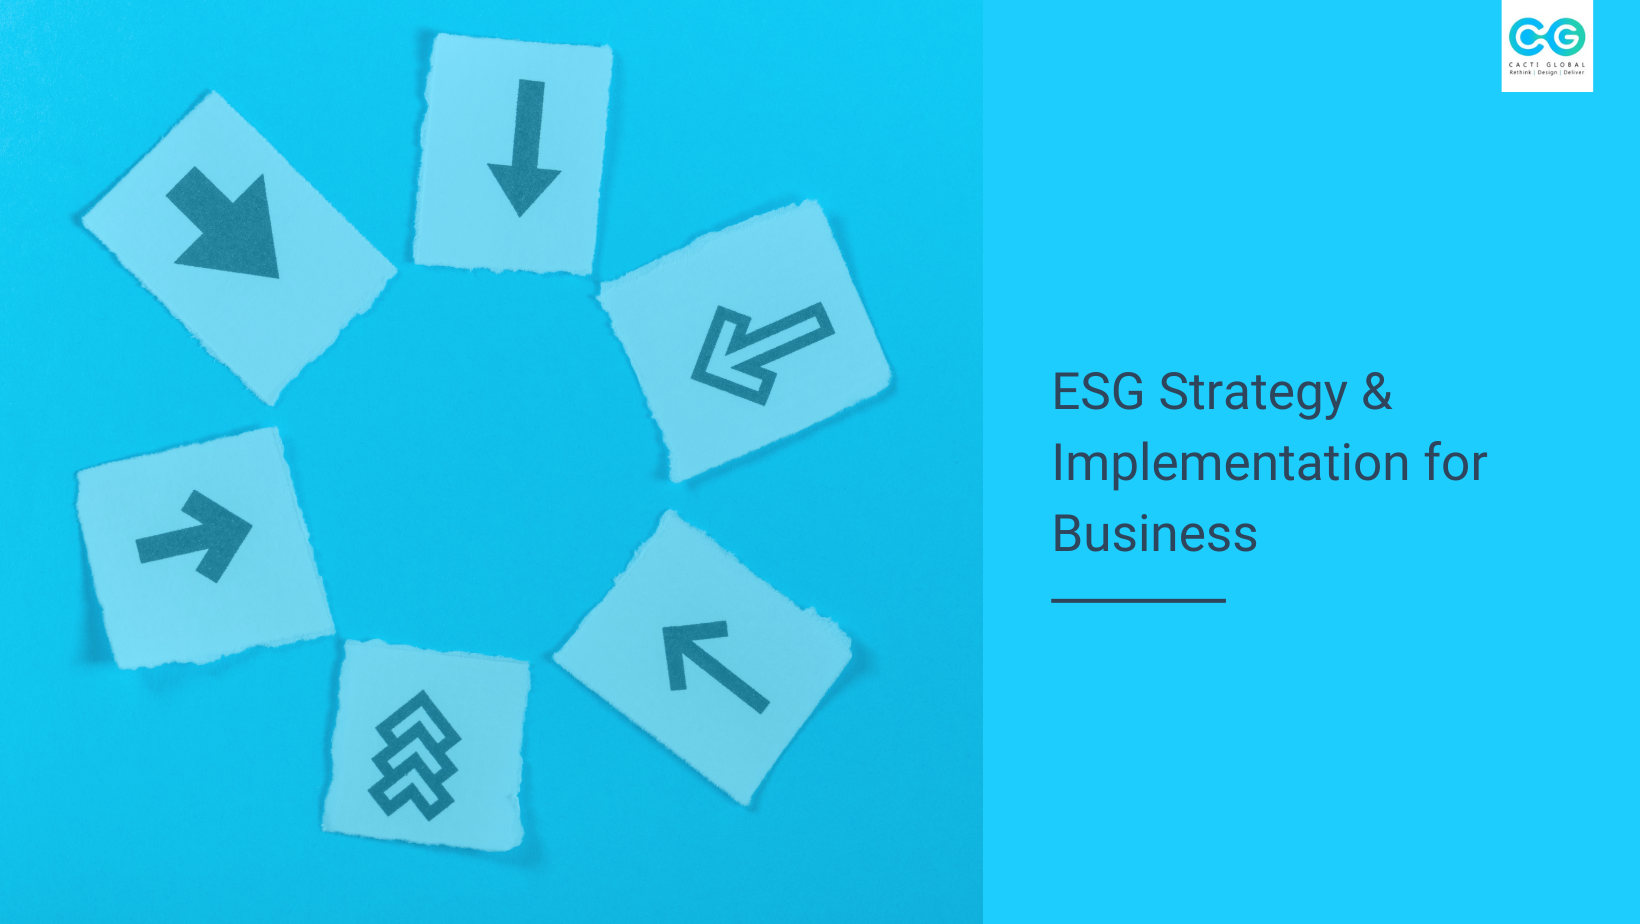 ESG strategy and implementation for business